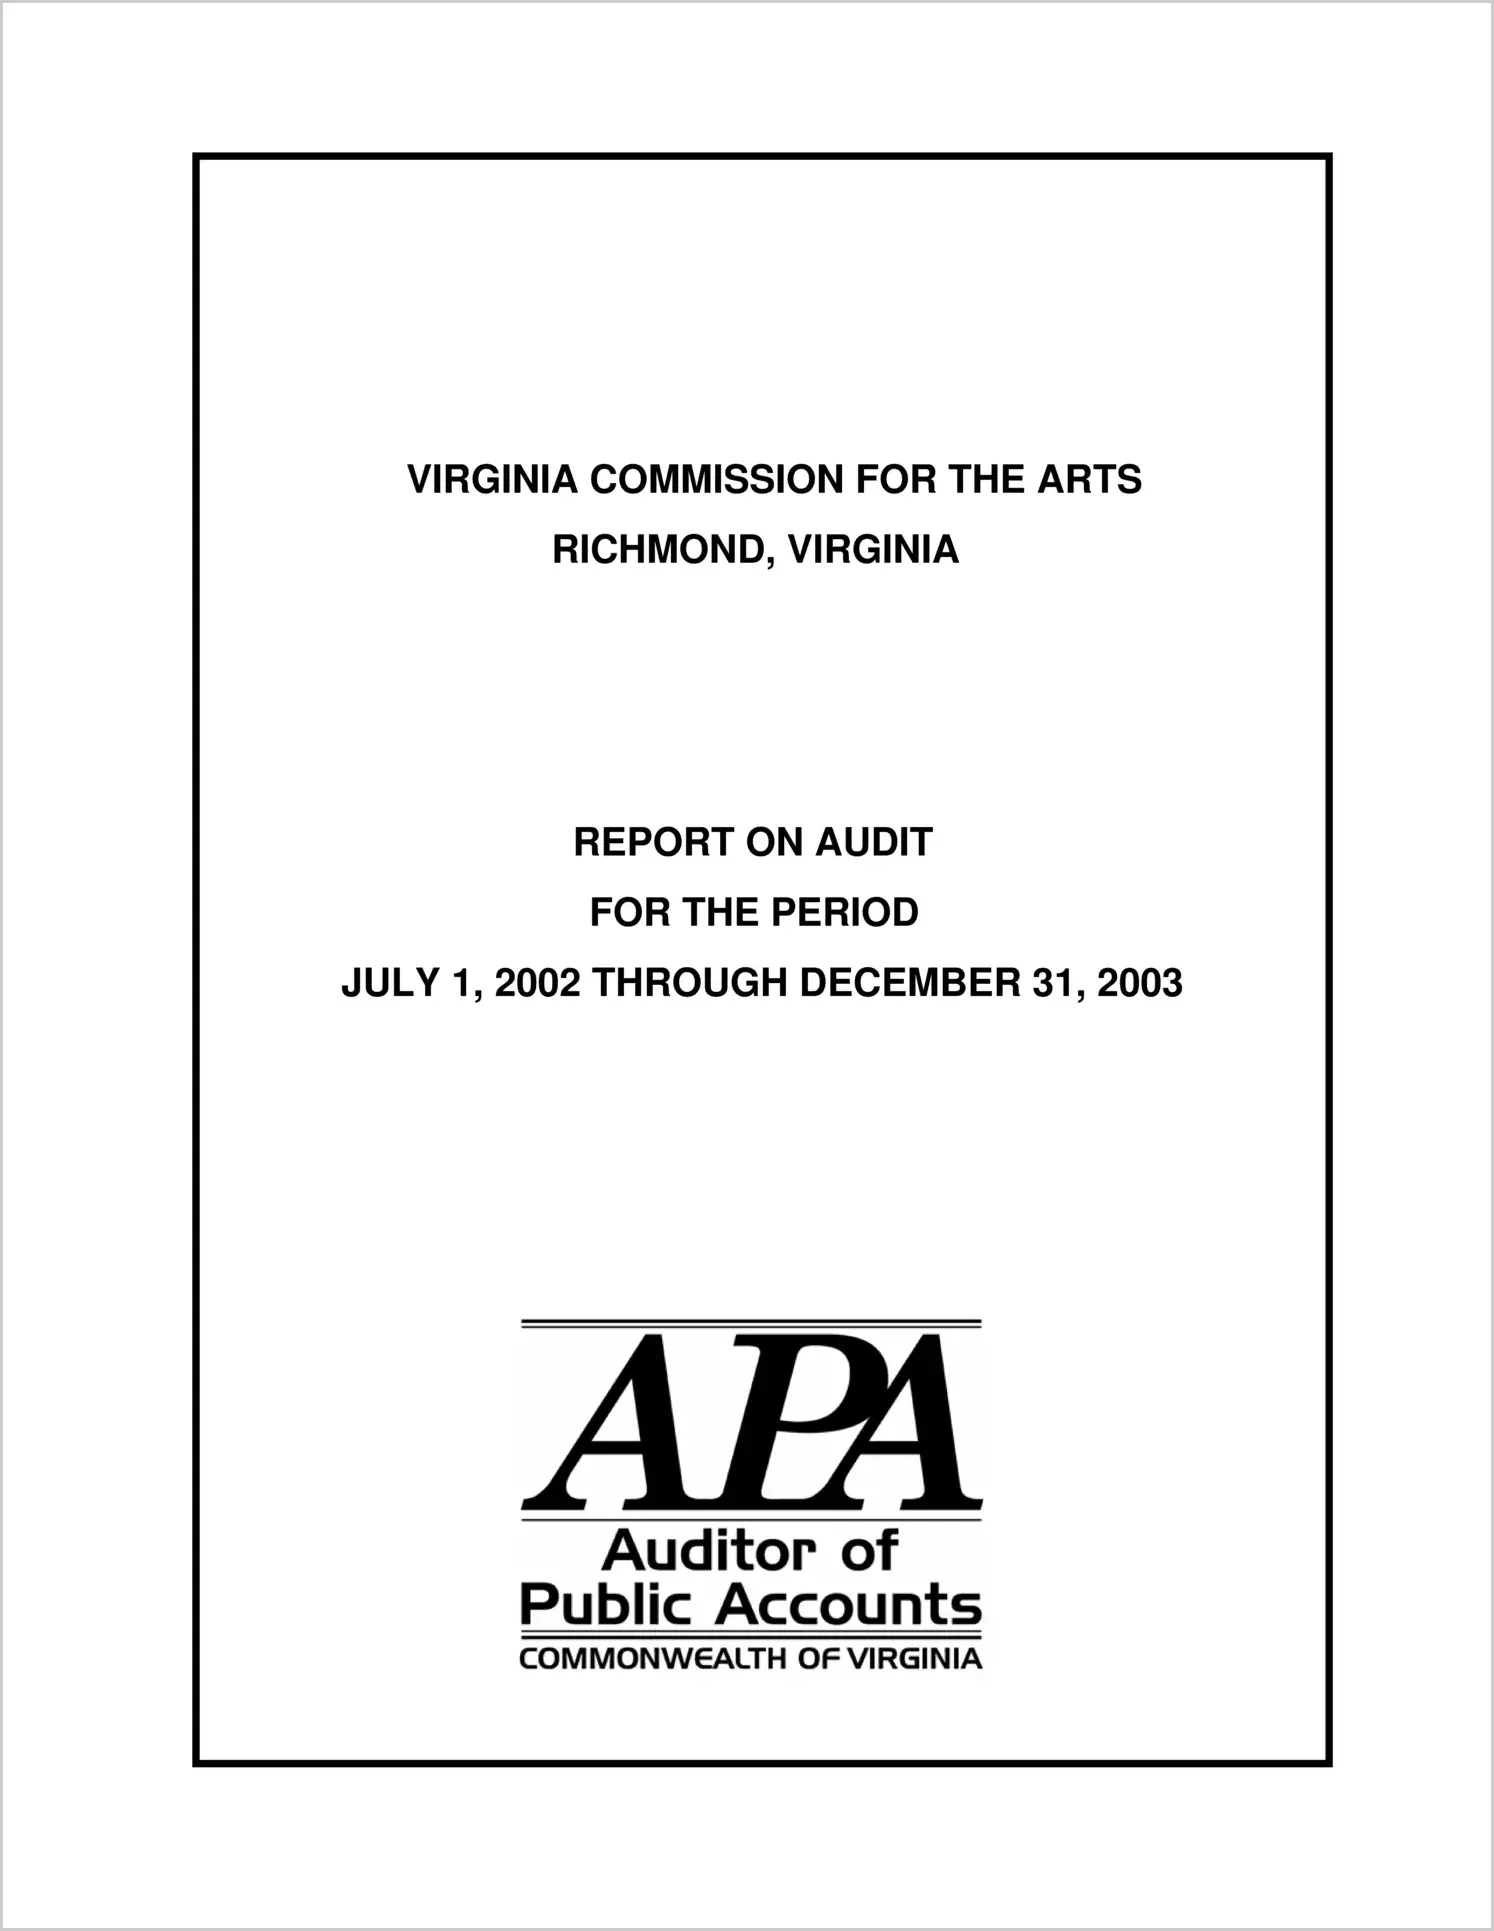 Virginia Commission for the Arts for the period July 1, 2002 through December 31, 2003